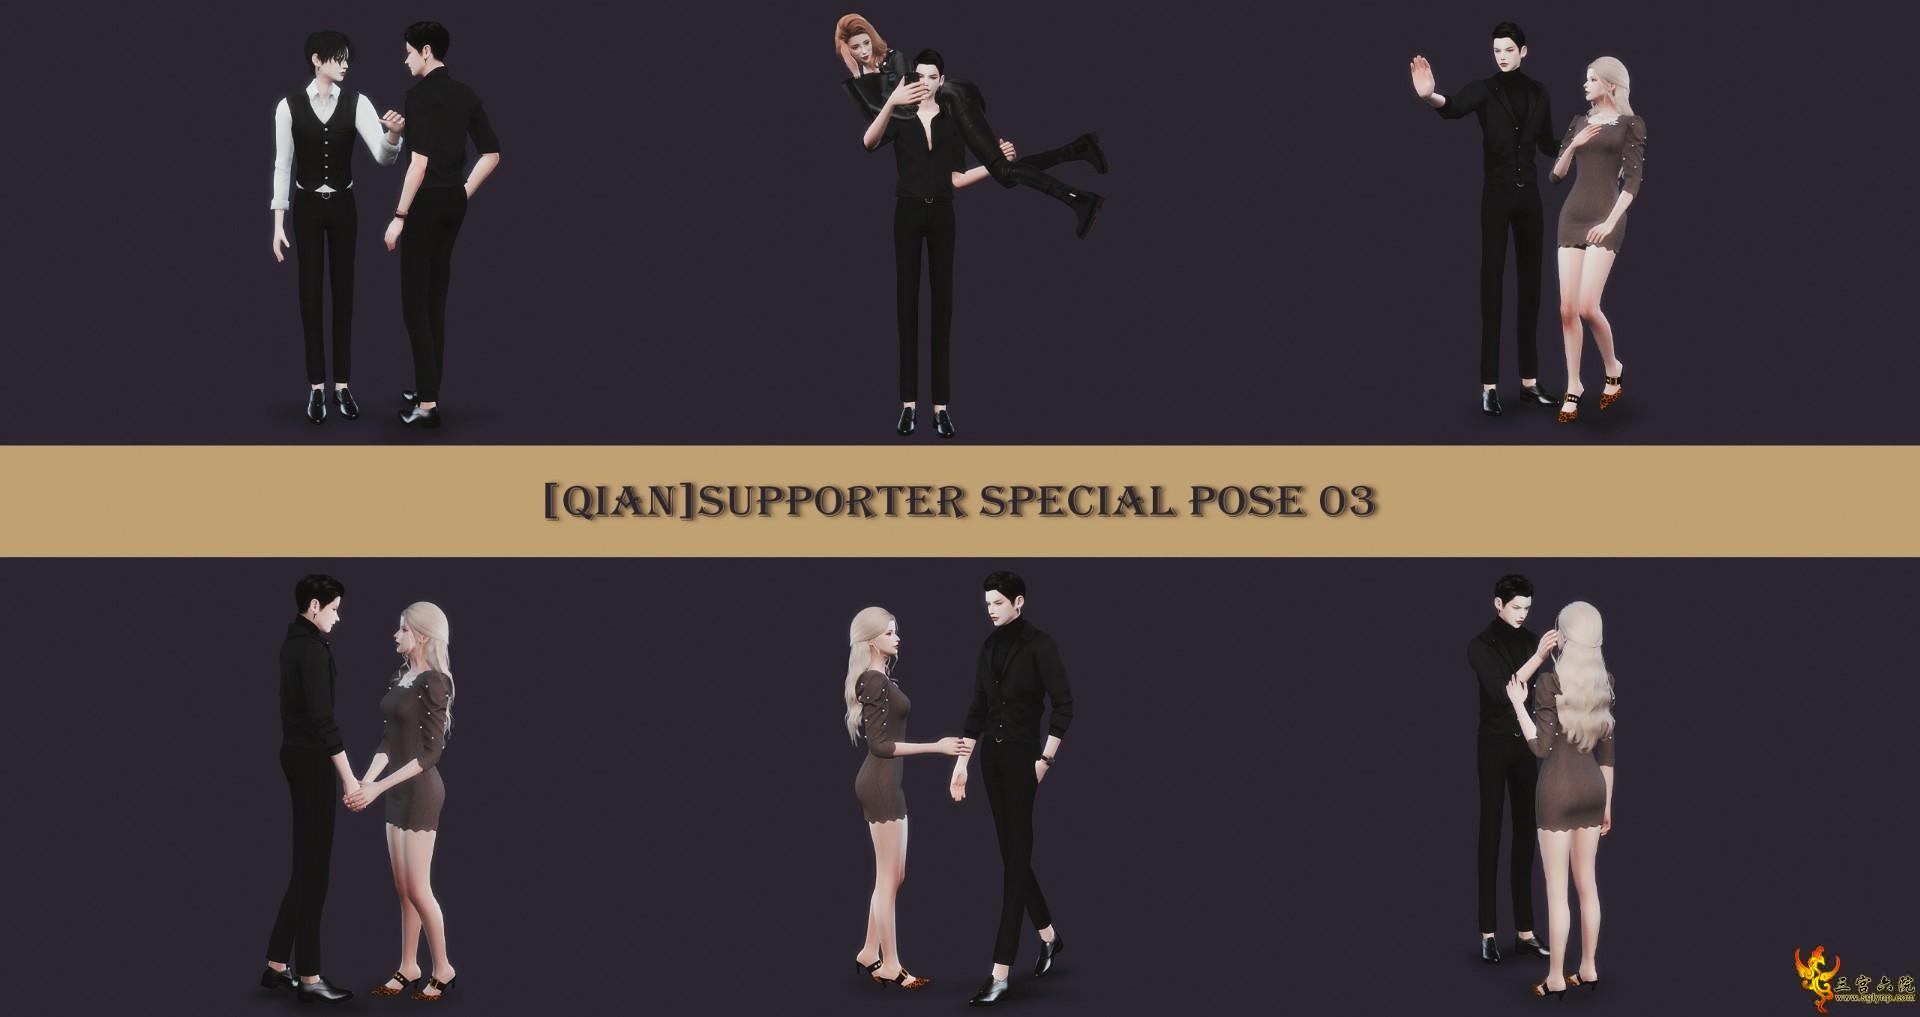 [Qian]Supporter Special pose 03.jpg